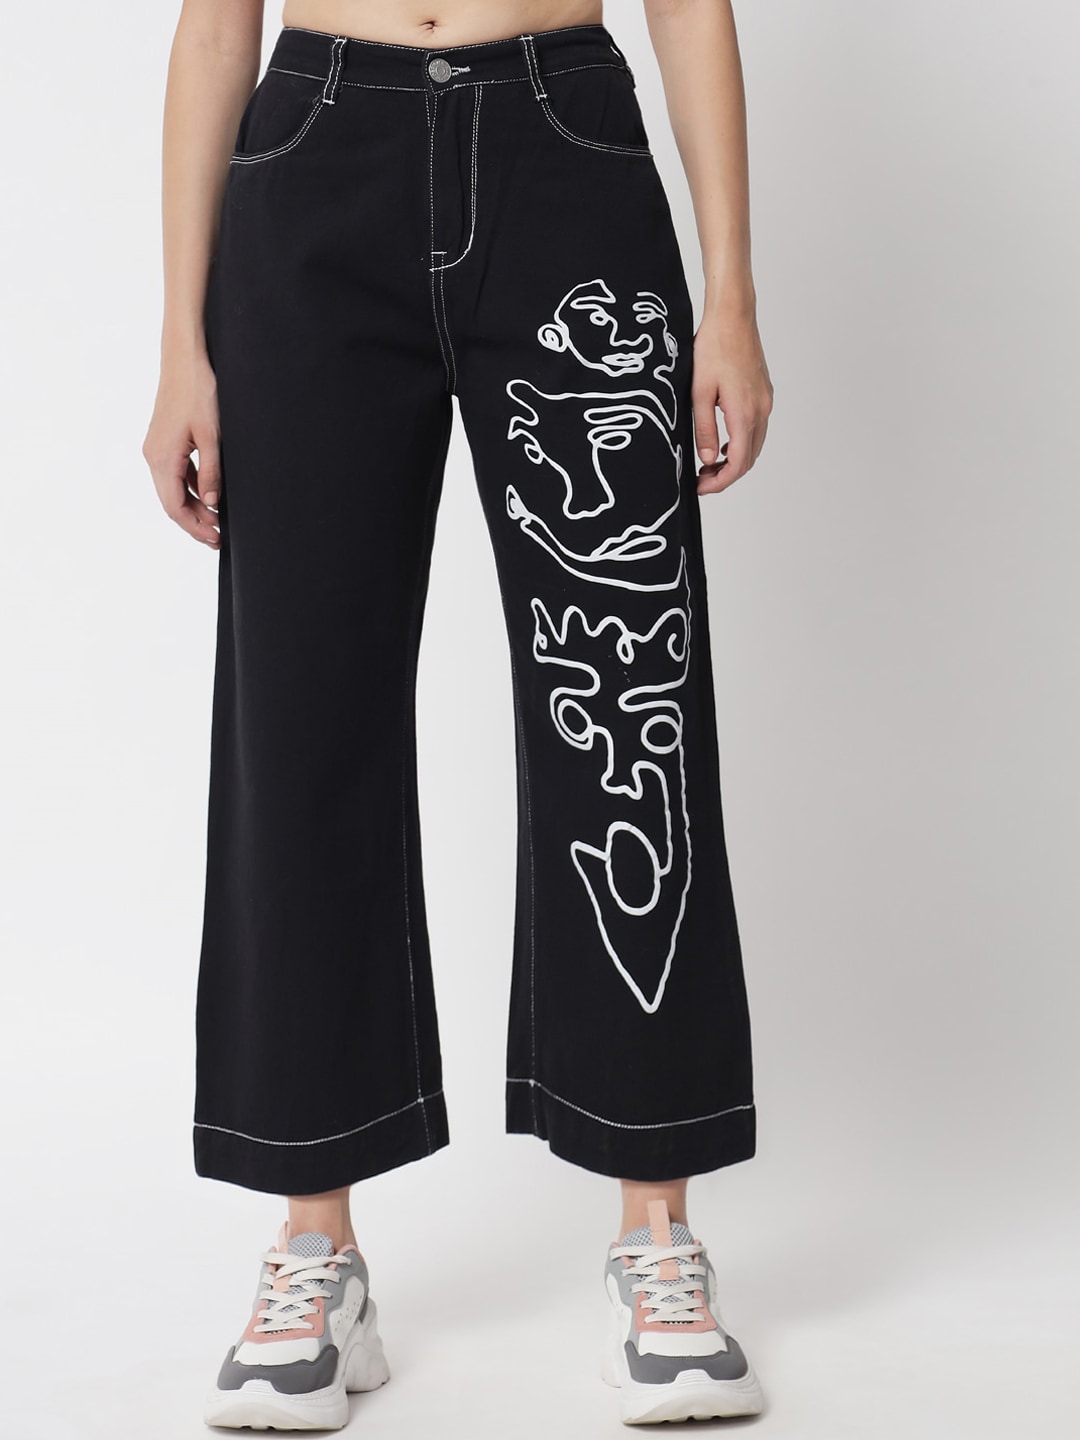 River Of Design Jeans Women Black Printed Wide Leg High-Rise Jeans Price in India